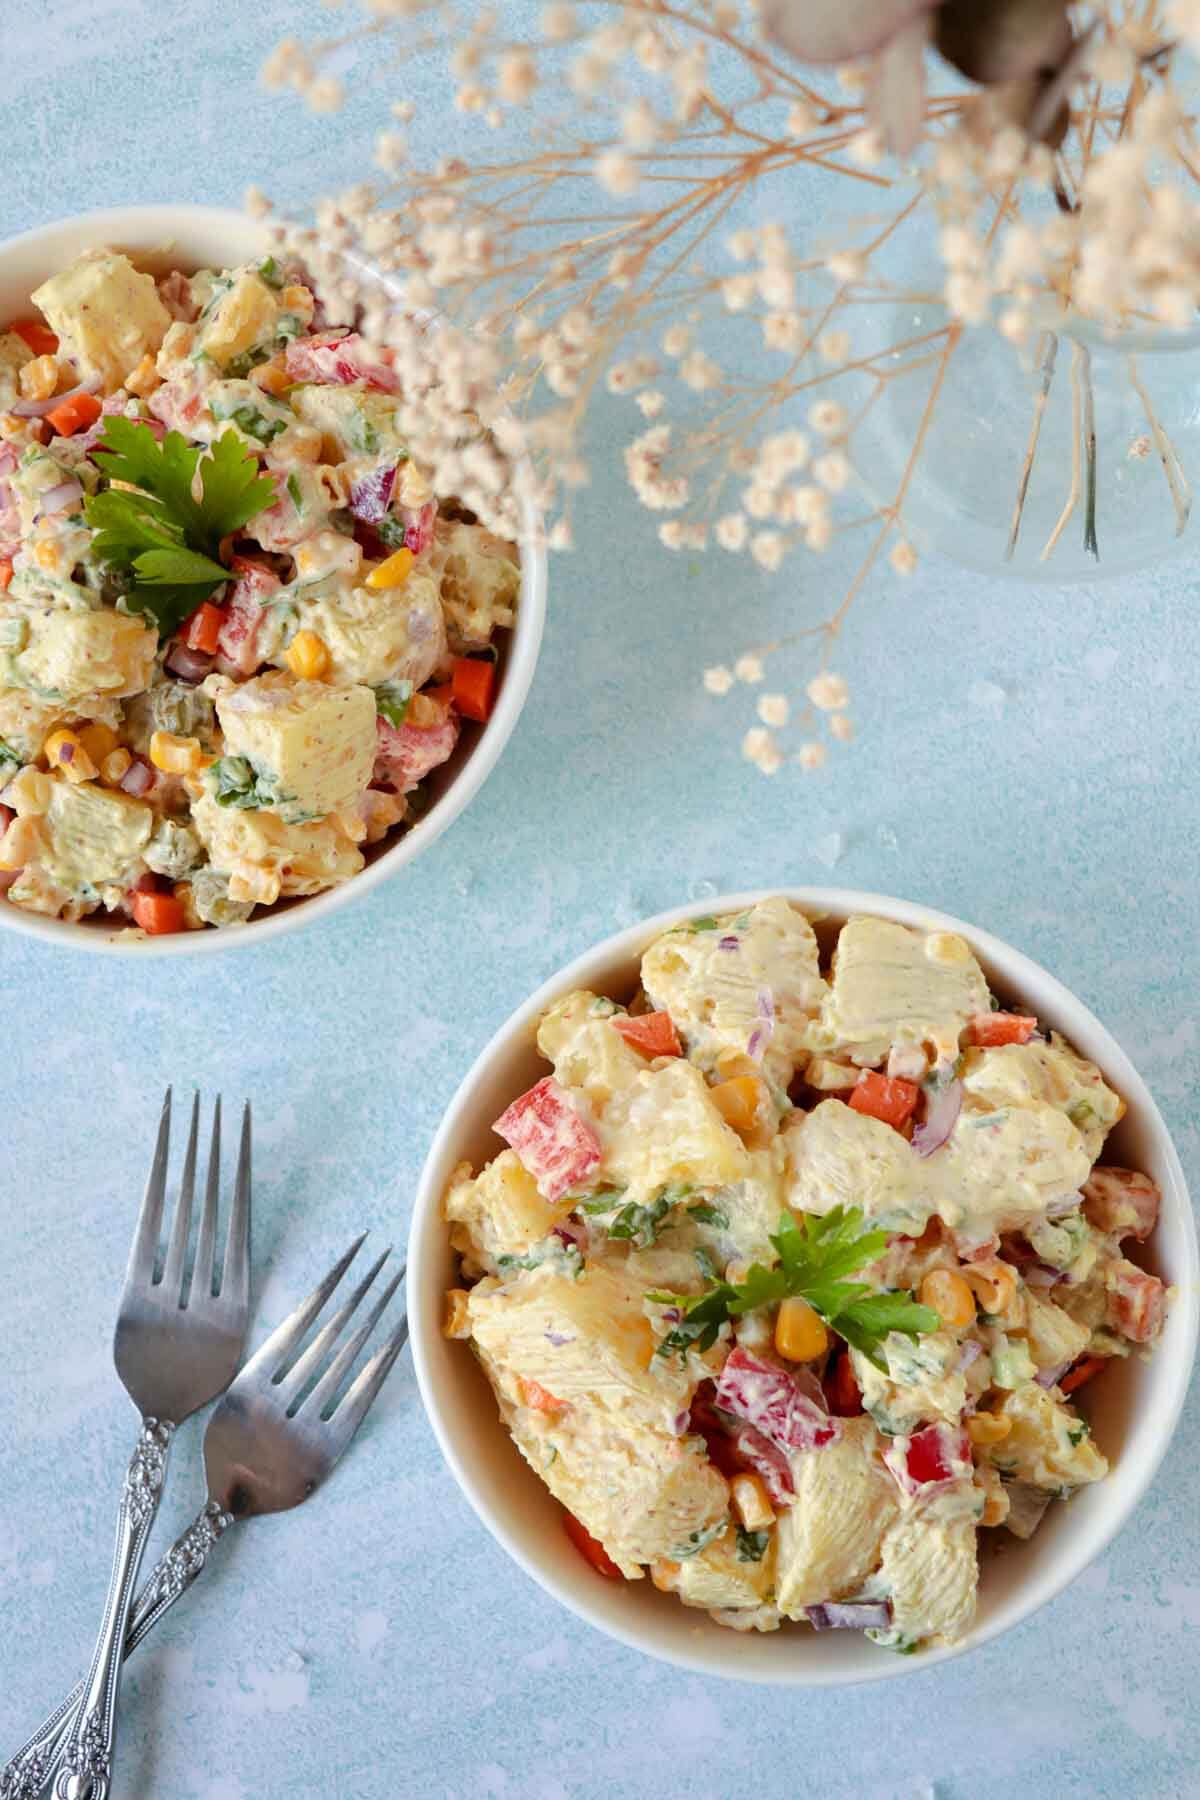 Two cream bowls full of Caribbean potato salad, garnished with parsley.